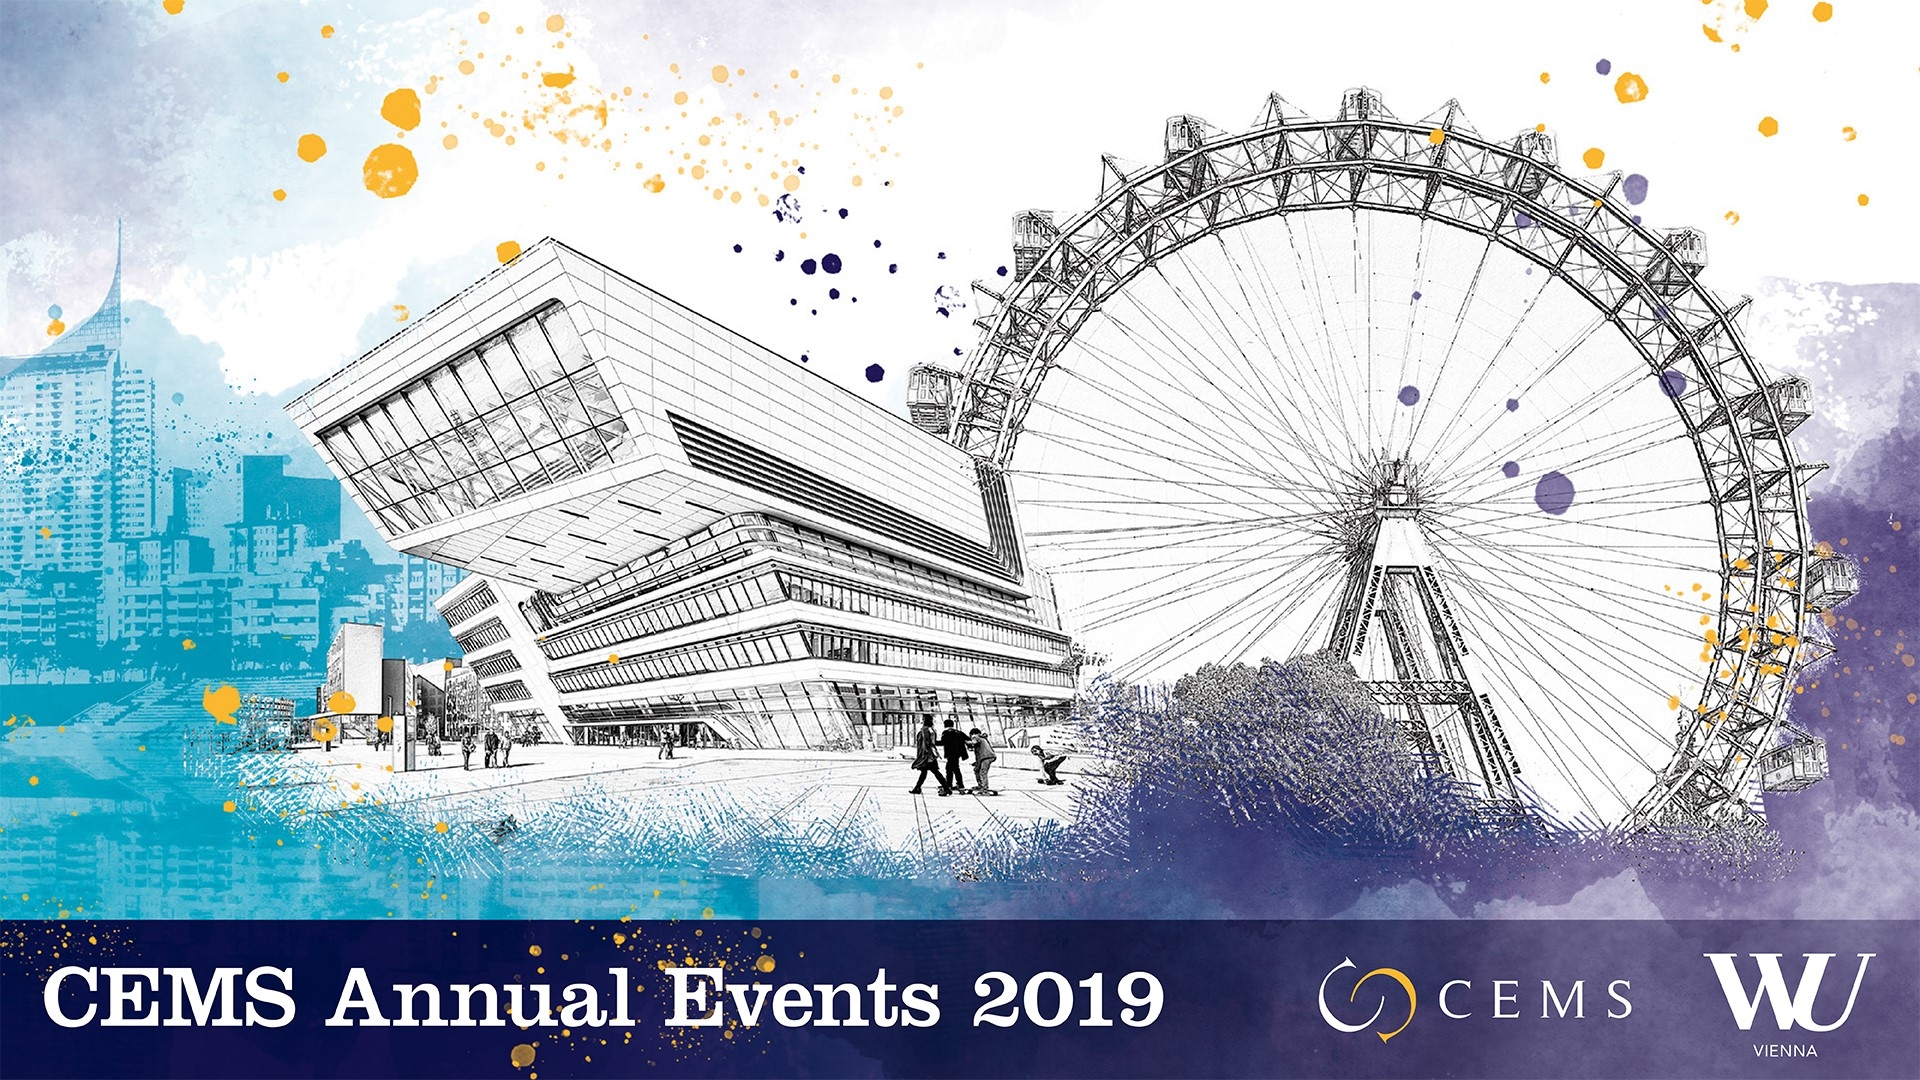 CEMS Annual Events 2019 at WU Vienna